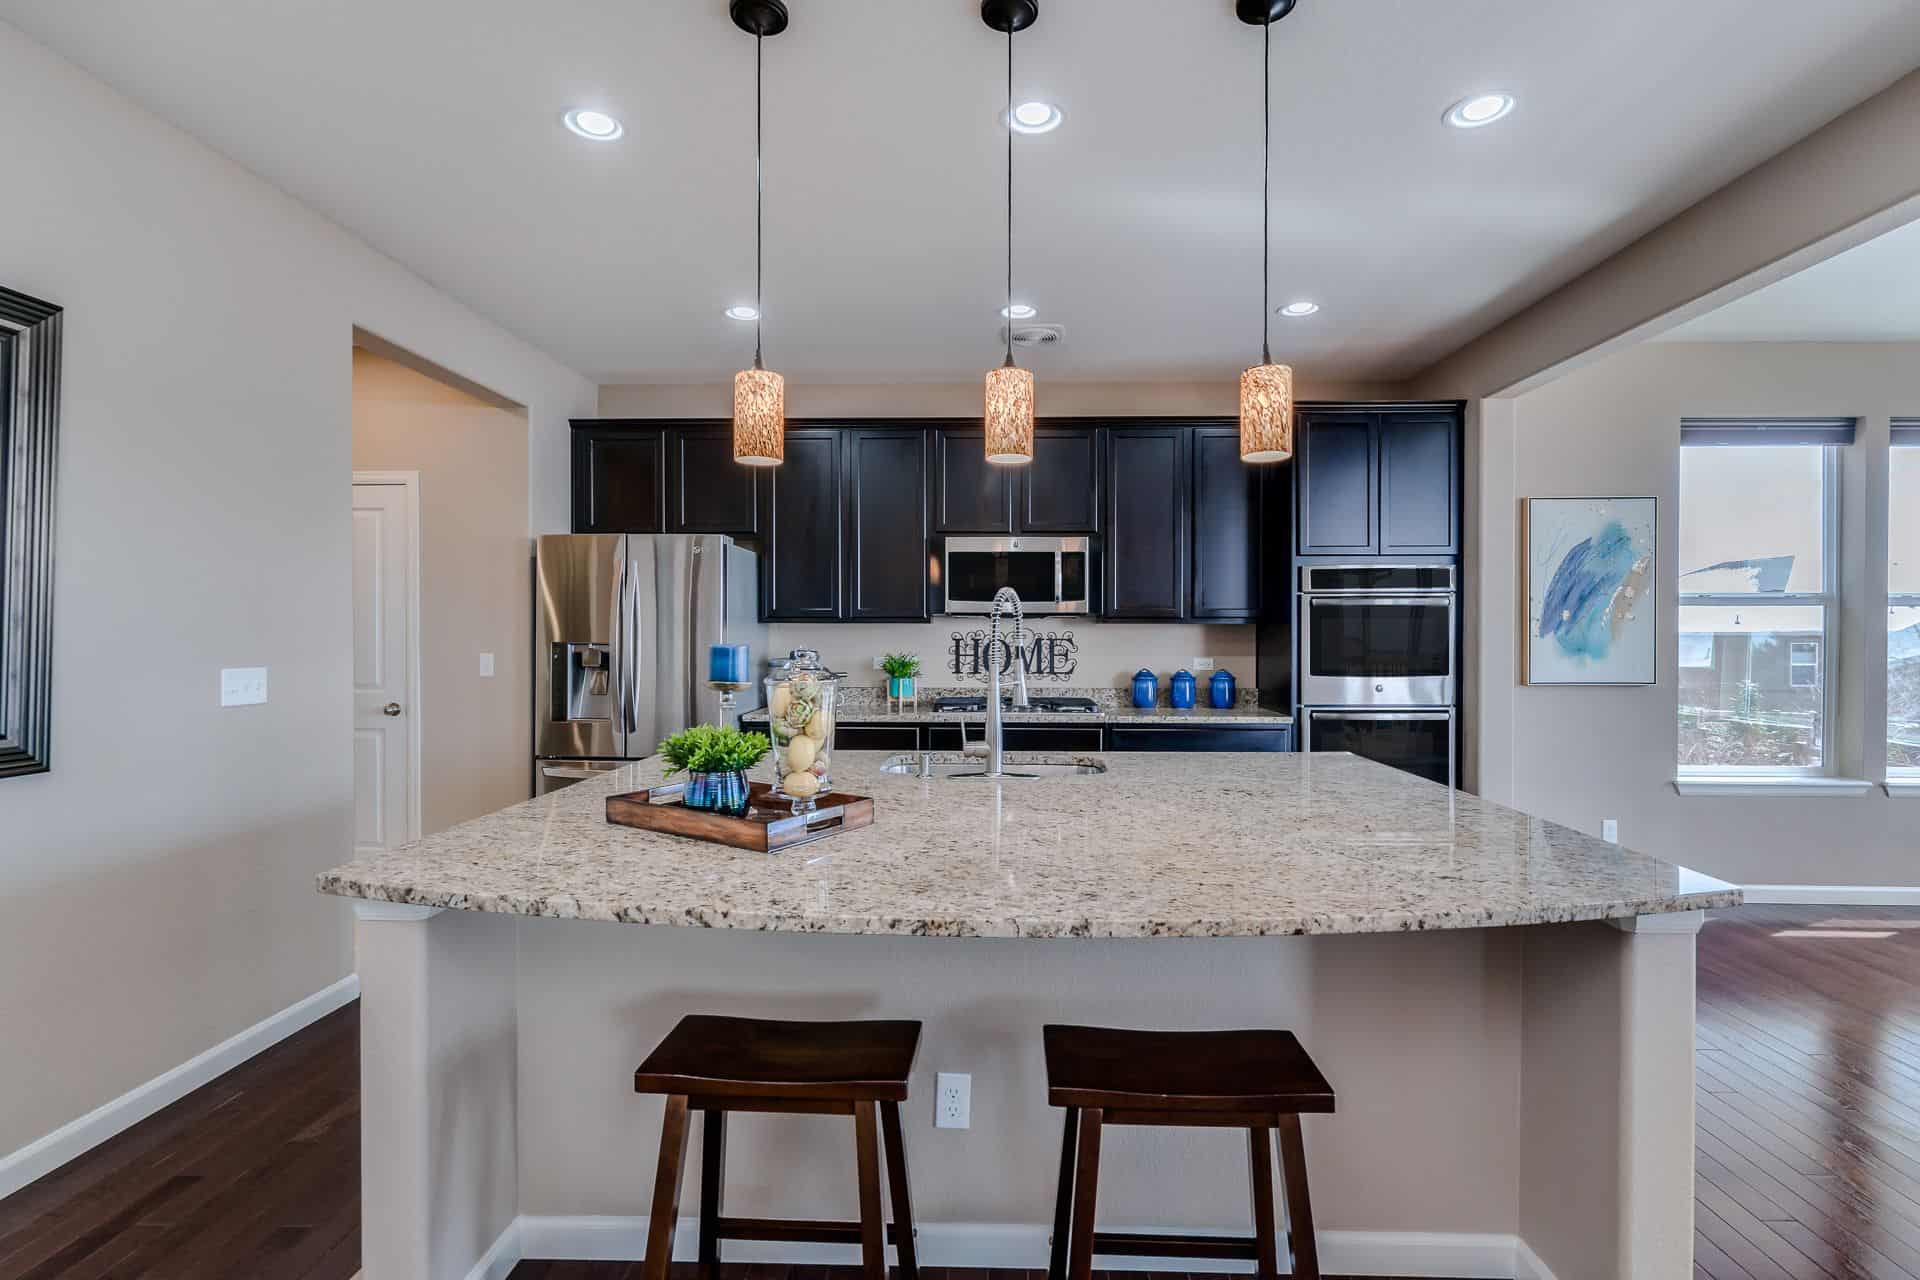 Kitchen Island with Counter Bar and Pendant Lights